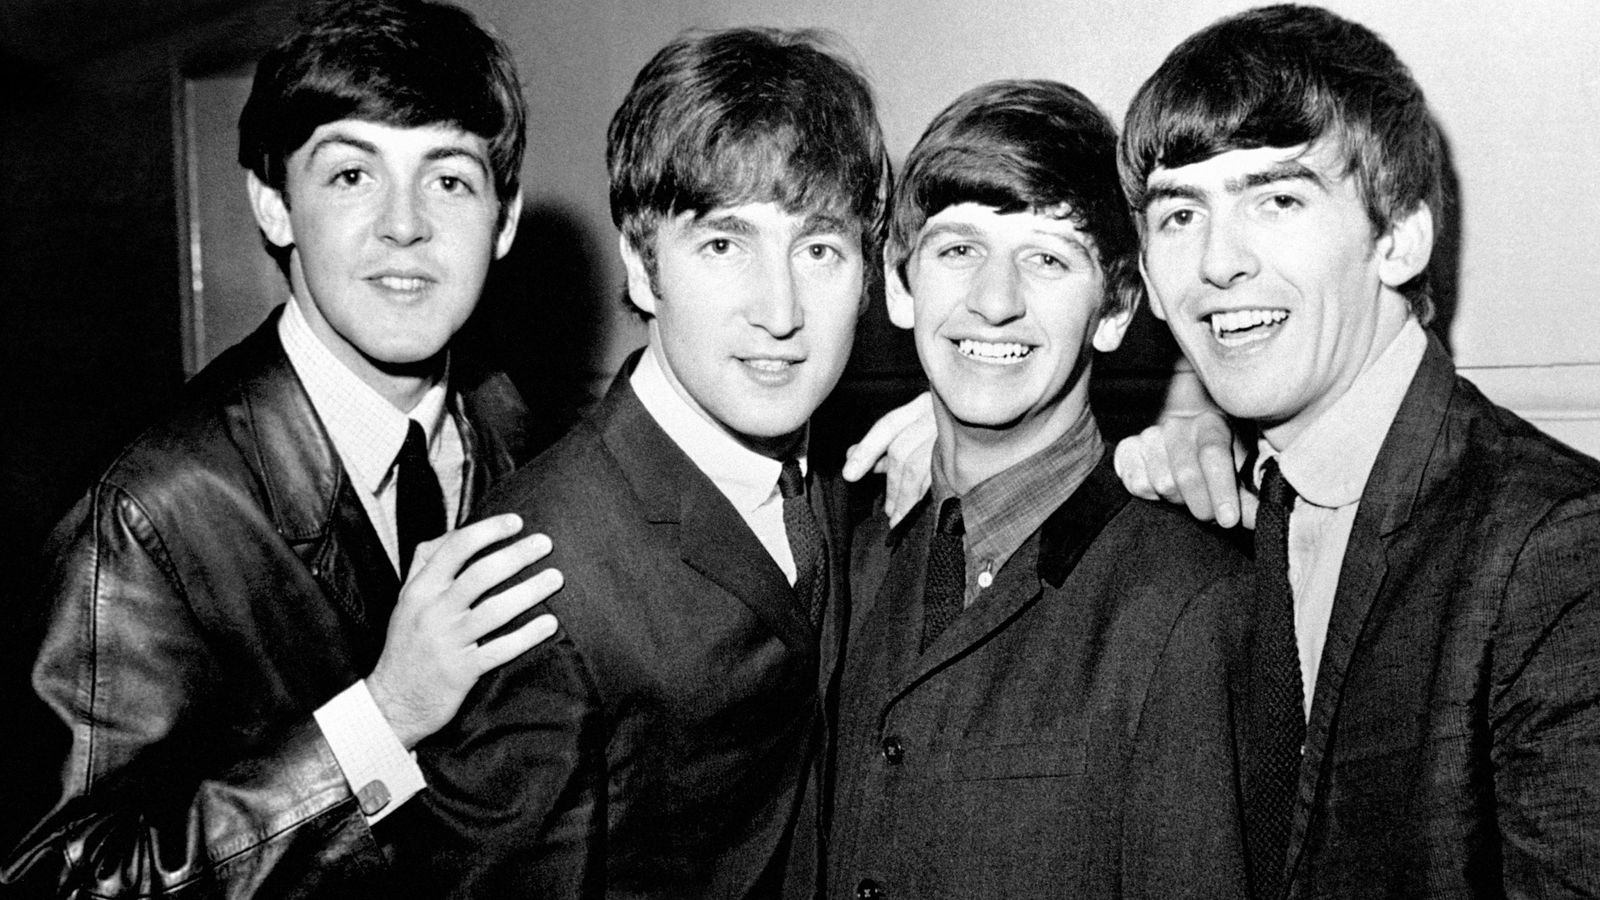 Beatles fans gear up for first new song in almost three decades - featuring John Lennon's vocals